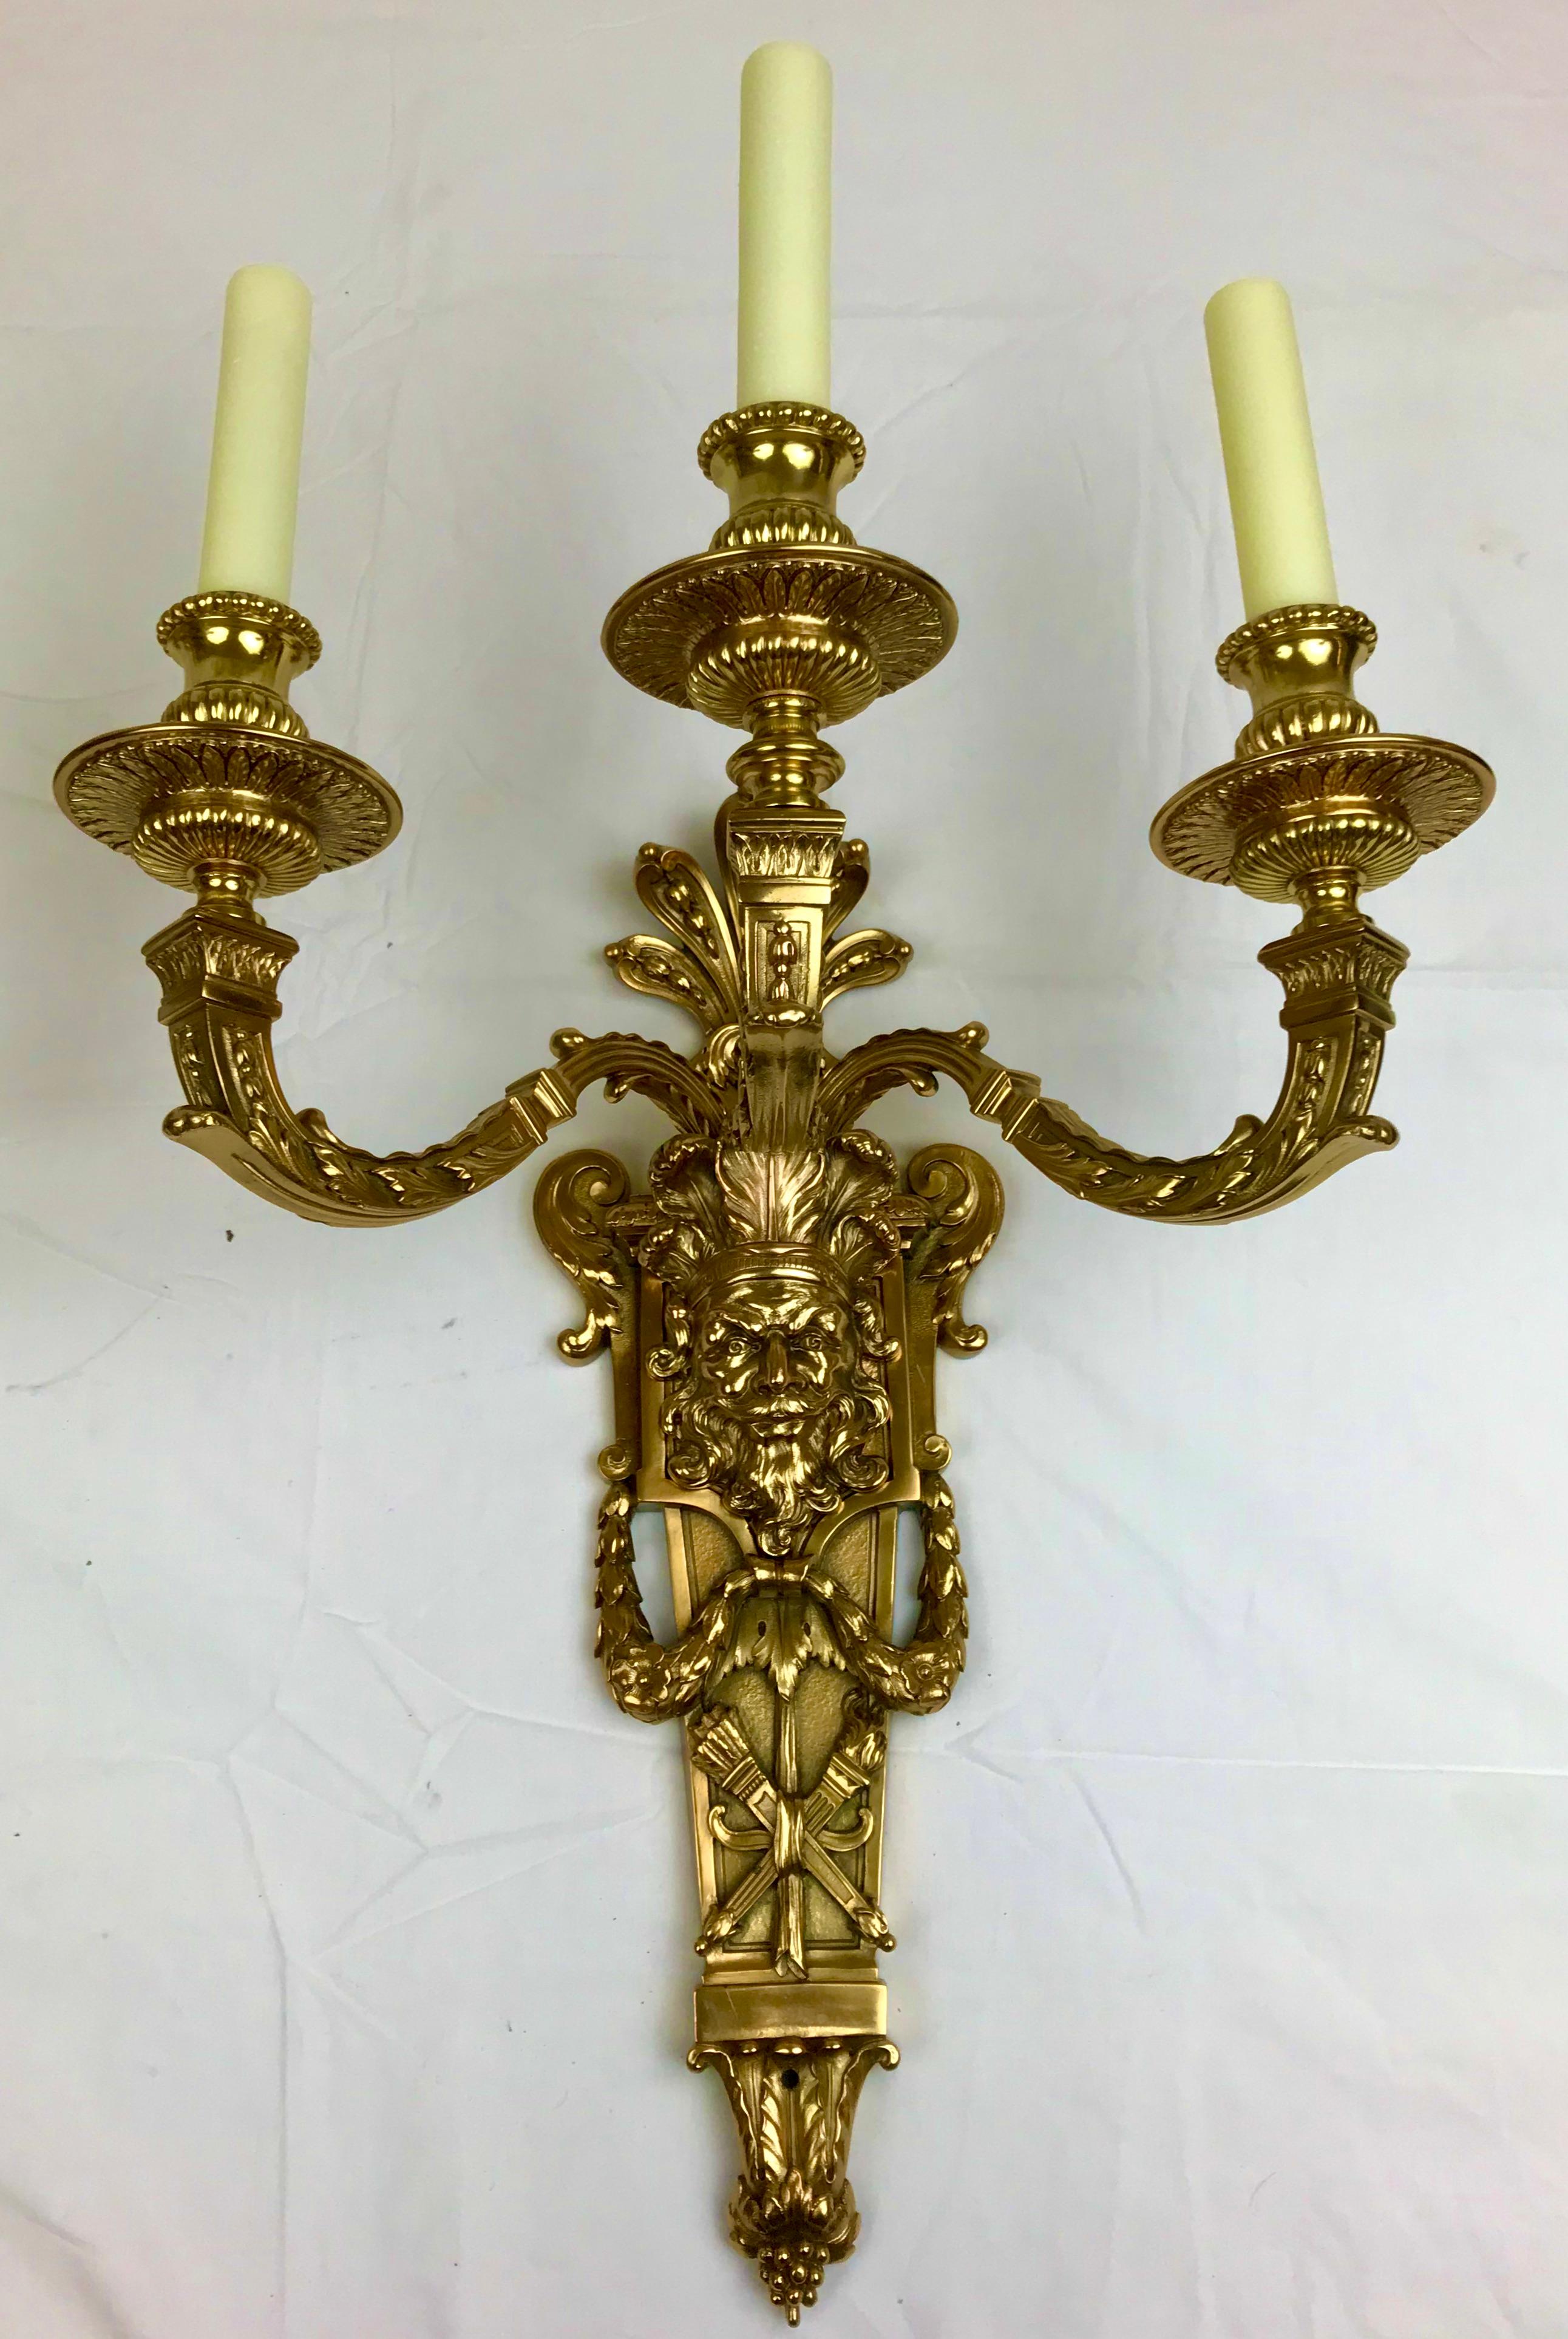 These large and highly detailed Baroque style three light sconces feature classic motifs including acanthus leaves and laurel swags.
They originally hung in the dining room at Lyndhurst, the Pittsburgh mansion of the Harry K. Thaw family.